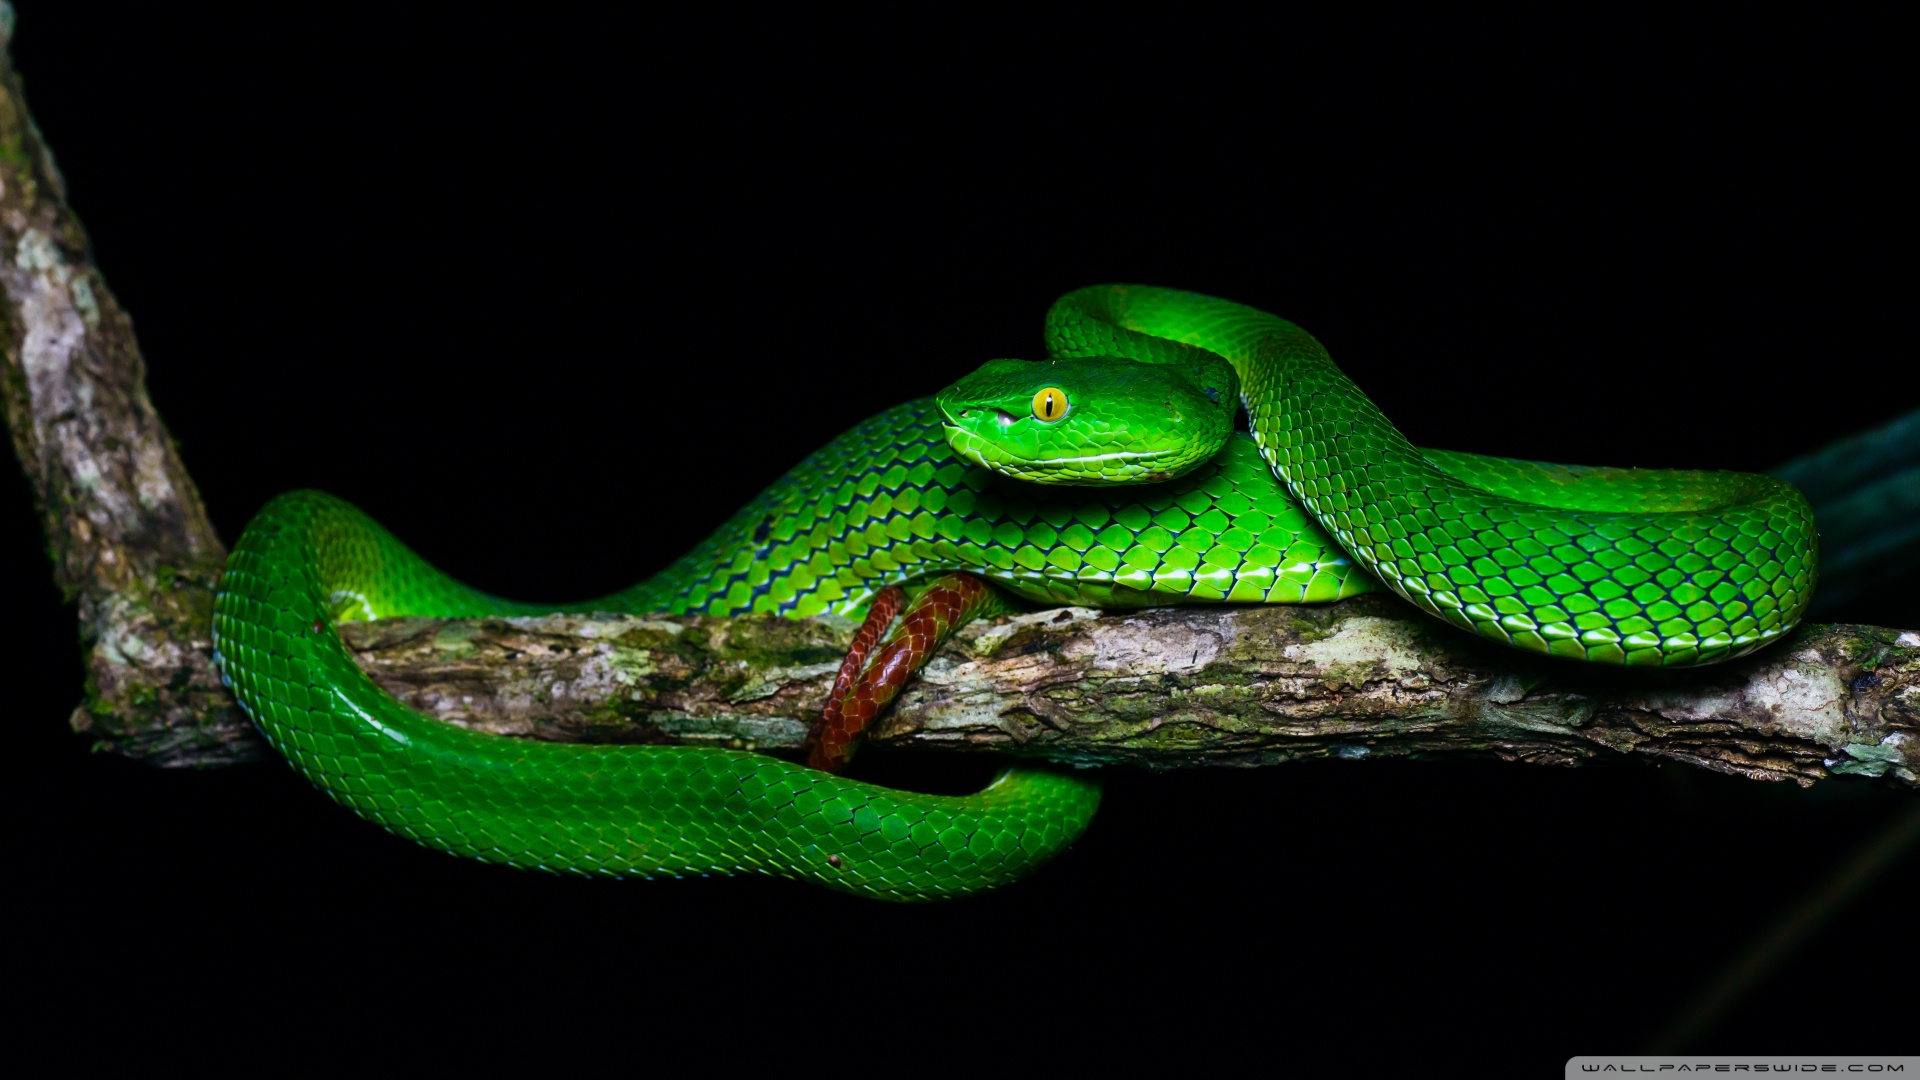 General 1920x1080 snake nature branch reptile